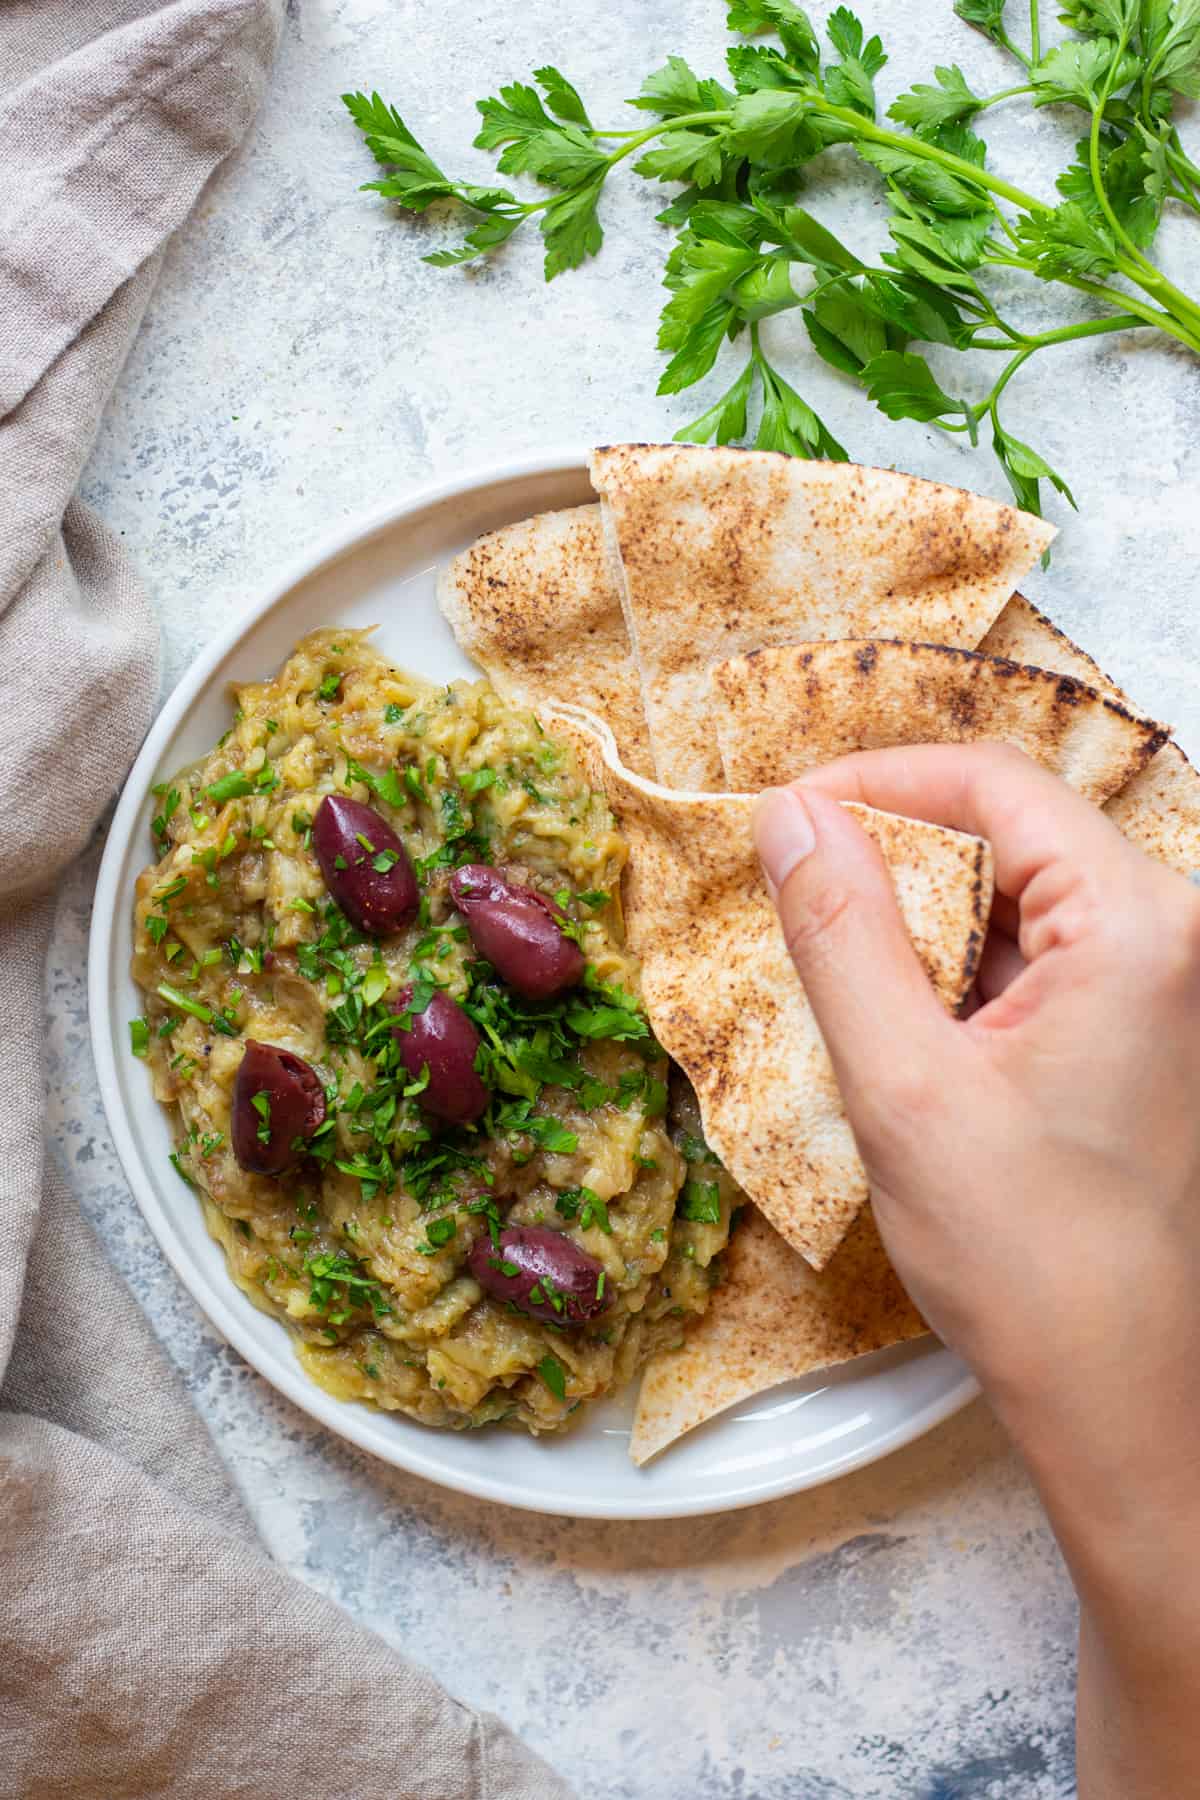 Melitzanosalata is a Greek eggplant dip that's made with eggplant, garlic and lemon juice. You can serve this eggplant appetizer as a part of a mezze platter with some pita. 
